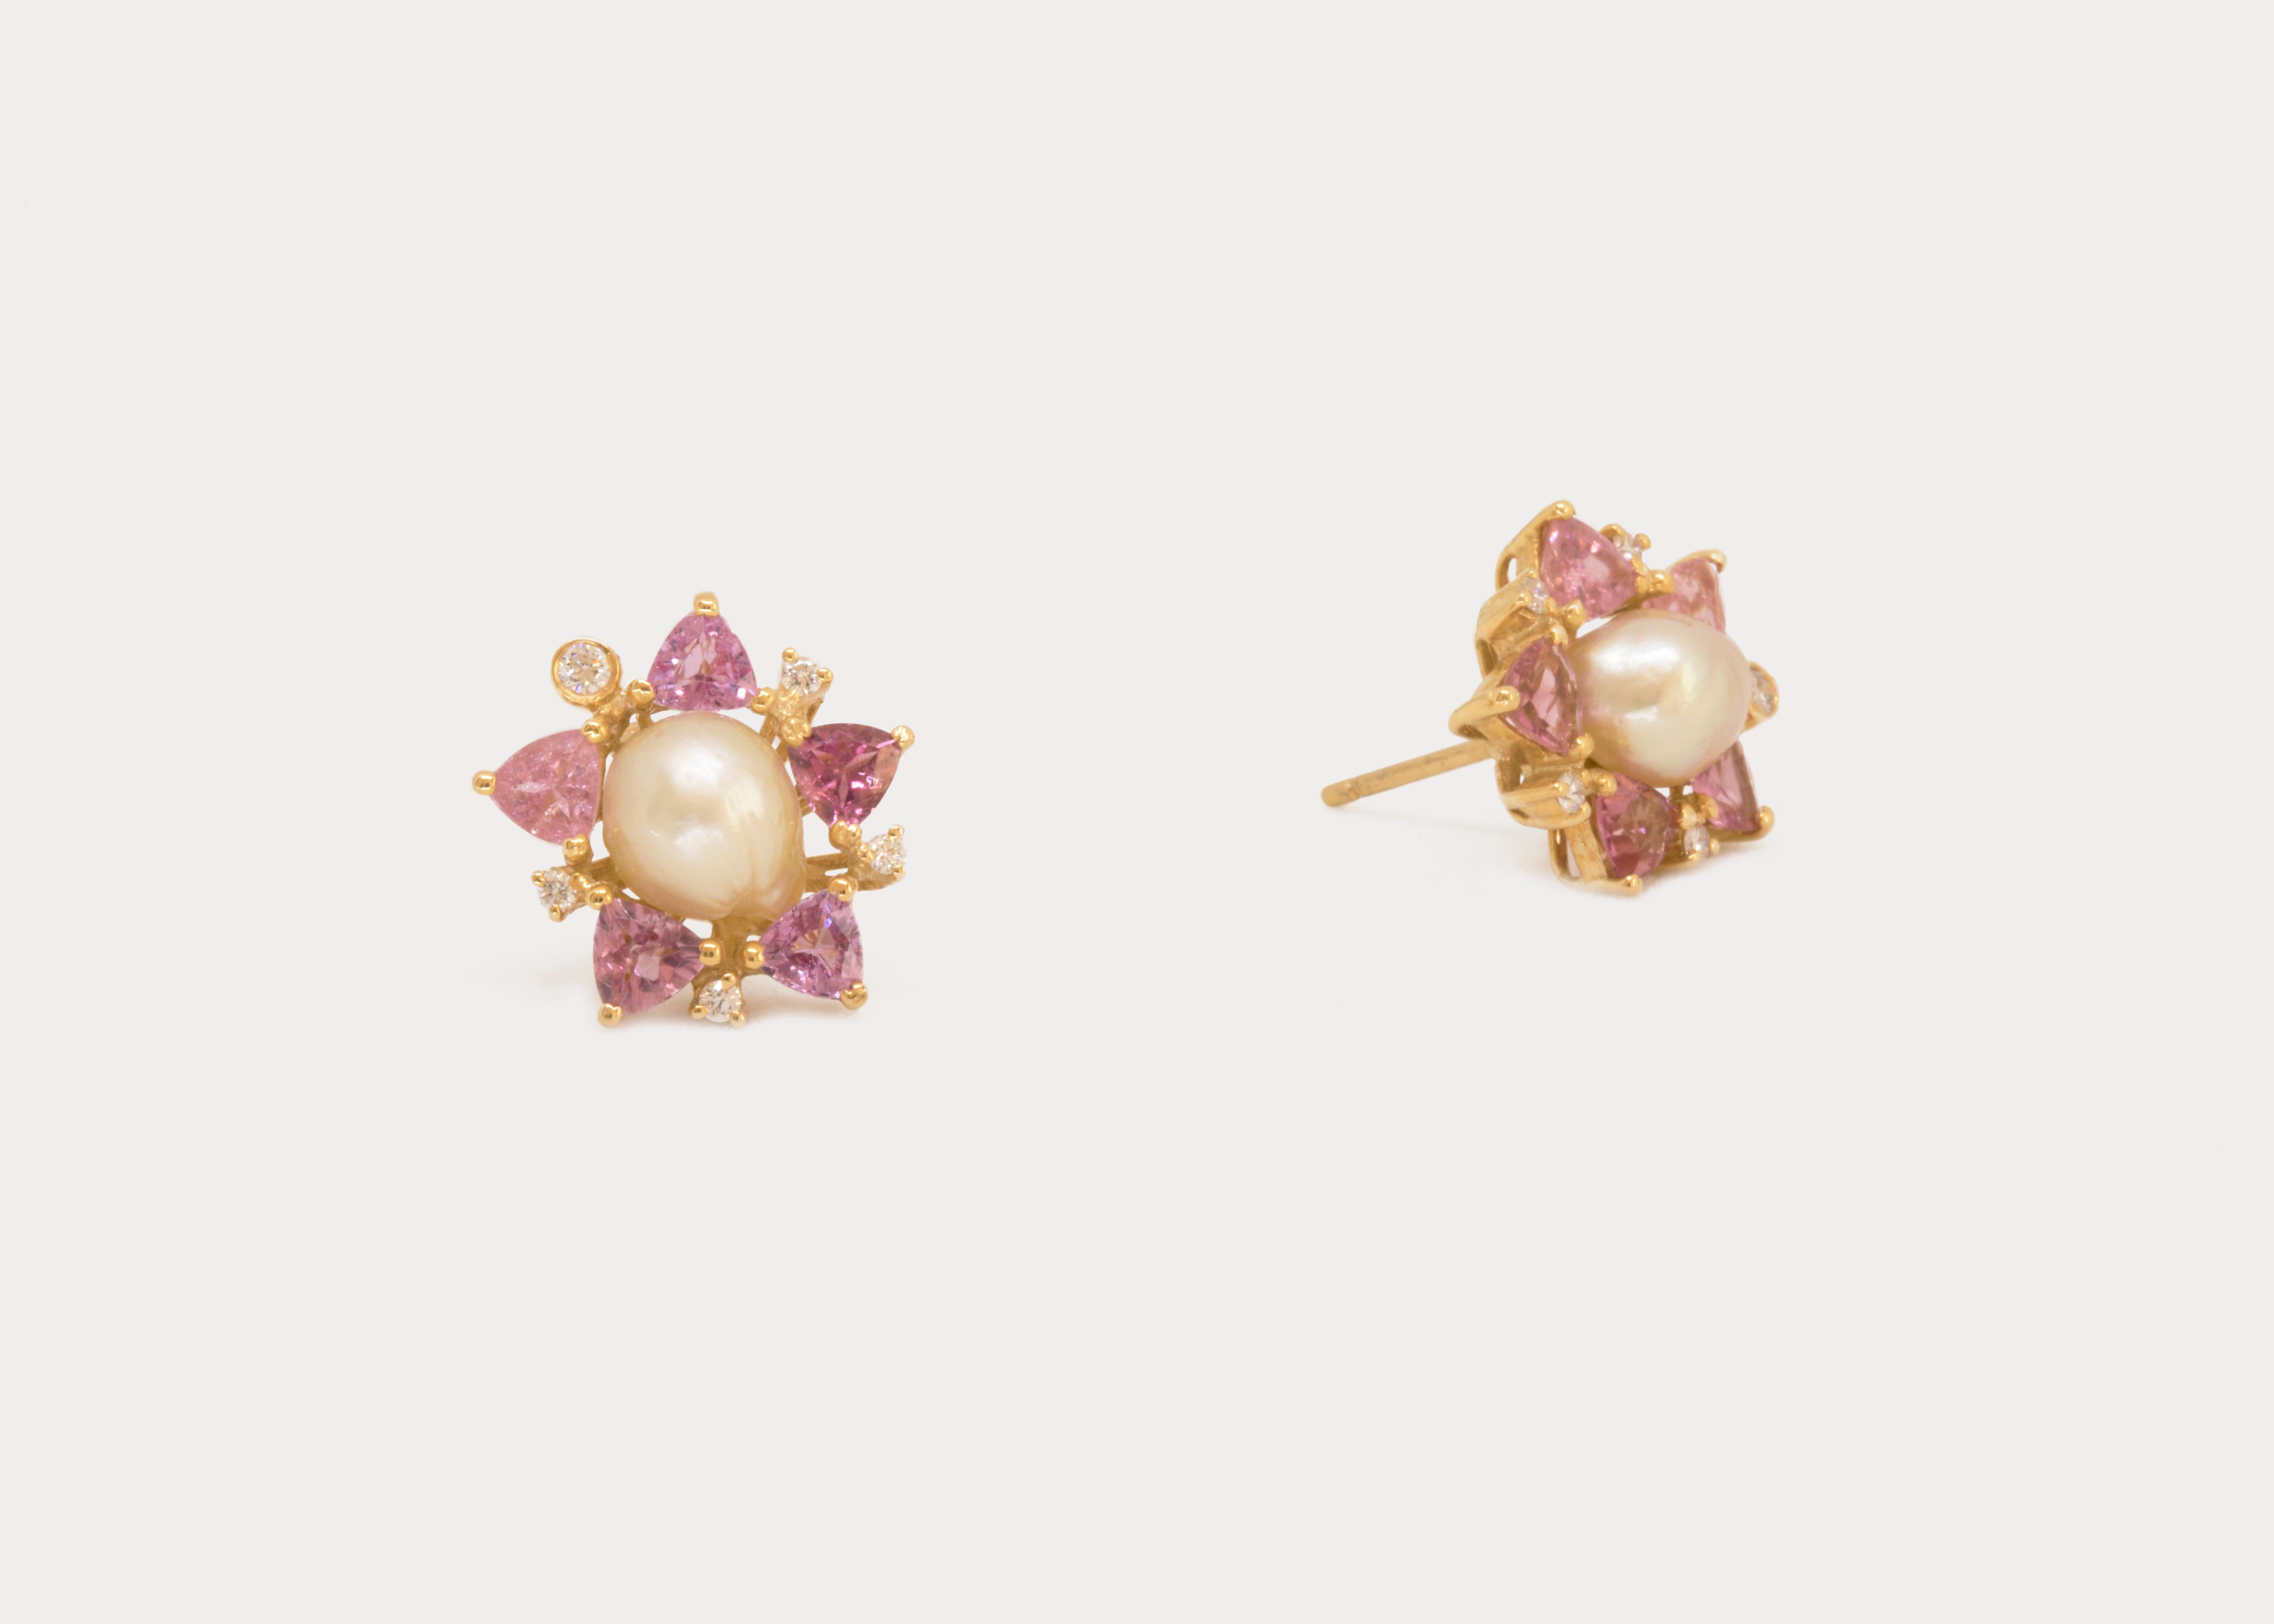 A collection of red and pink gem stones surround these irregularly shaped tourmaline stones.
The natural pearl studs may be detached and worn separately. 

*This piece is one of a kind.

Gold Weight: 19.8 g
Pearl Weight: 4.83 ct.
Tourmaline Weight: